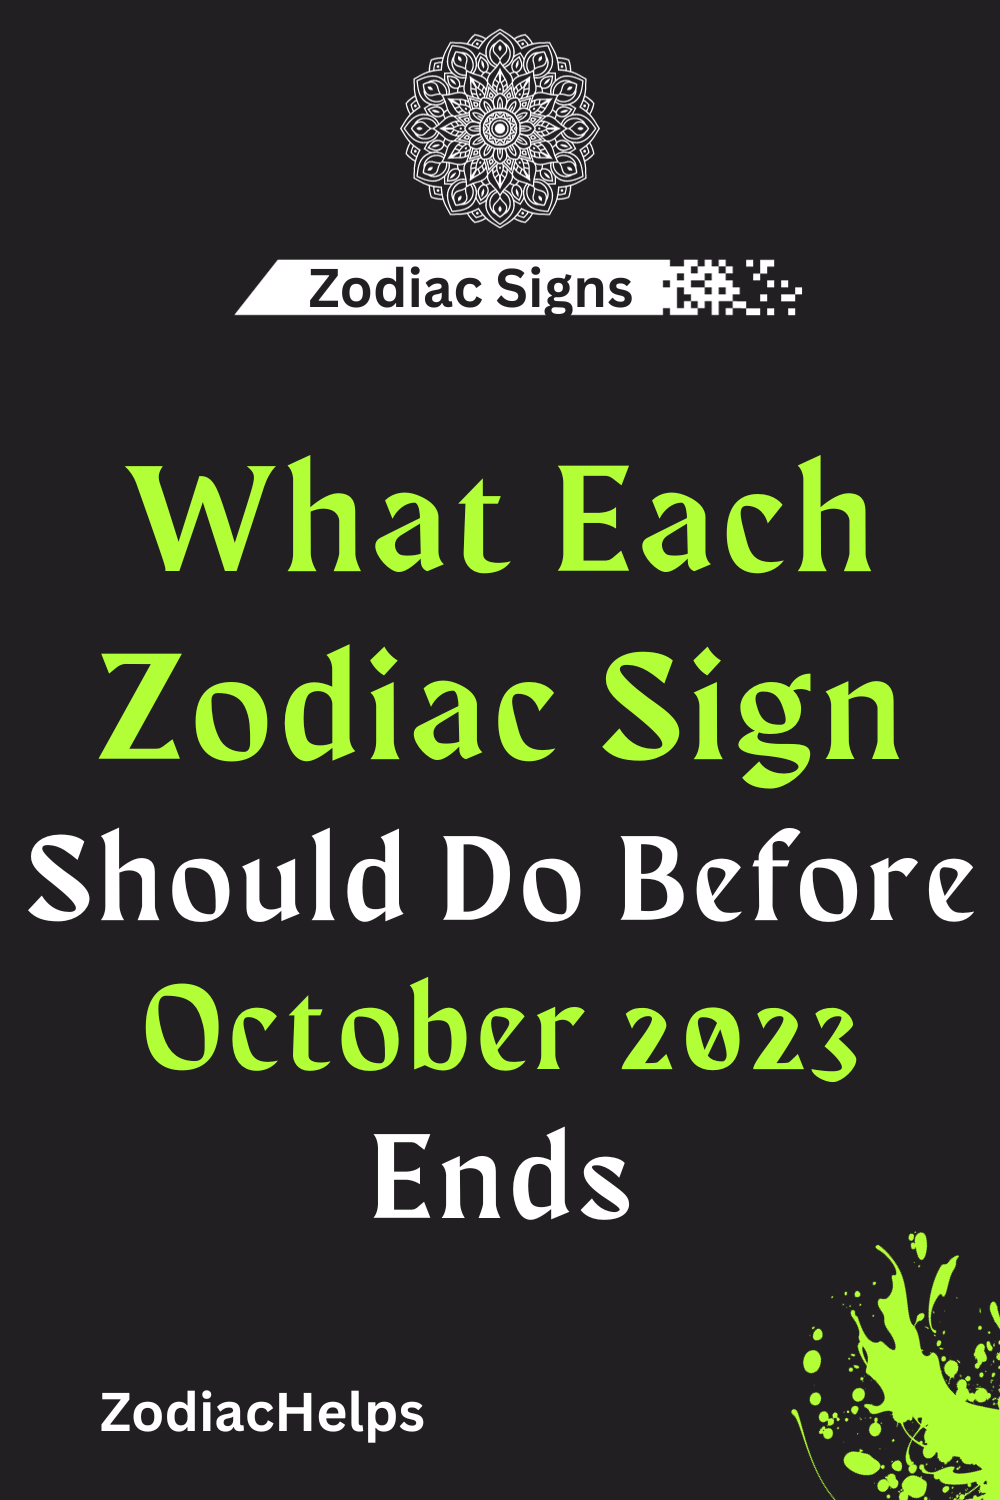 What Each Zodiac Sign Should Do Before October 2023 Ends